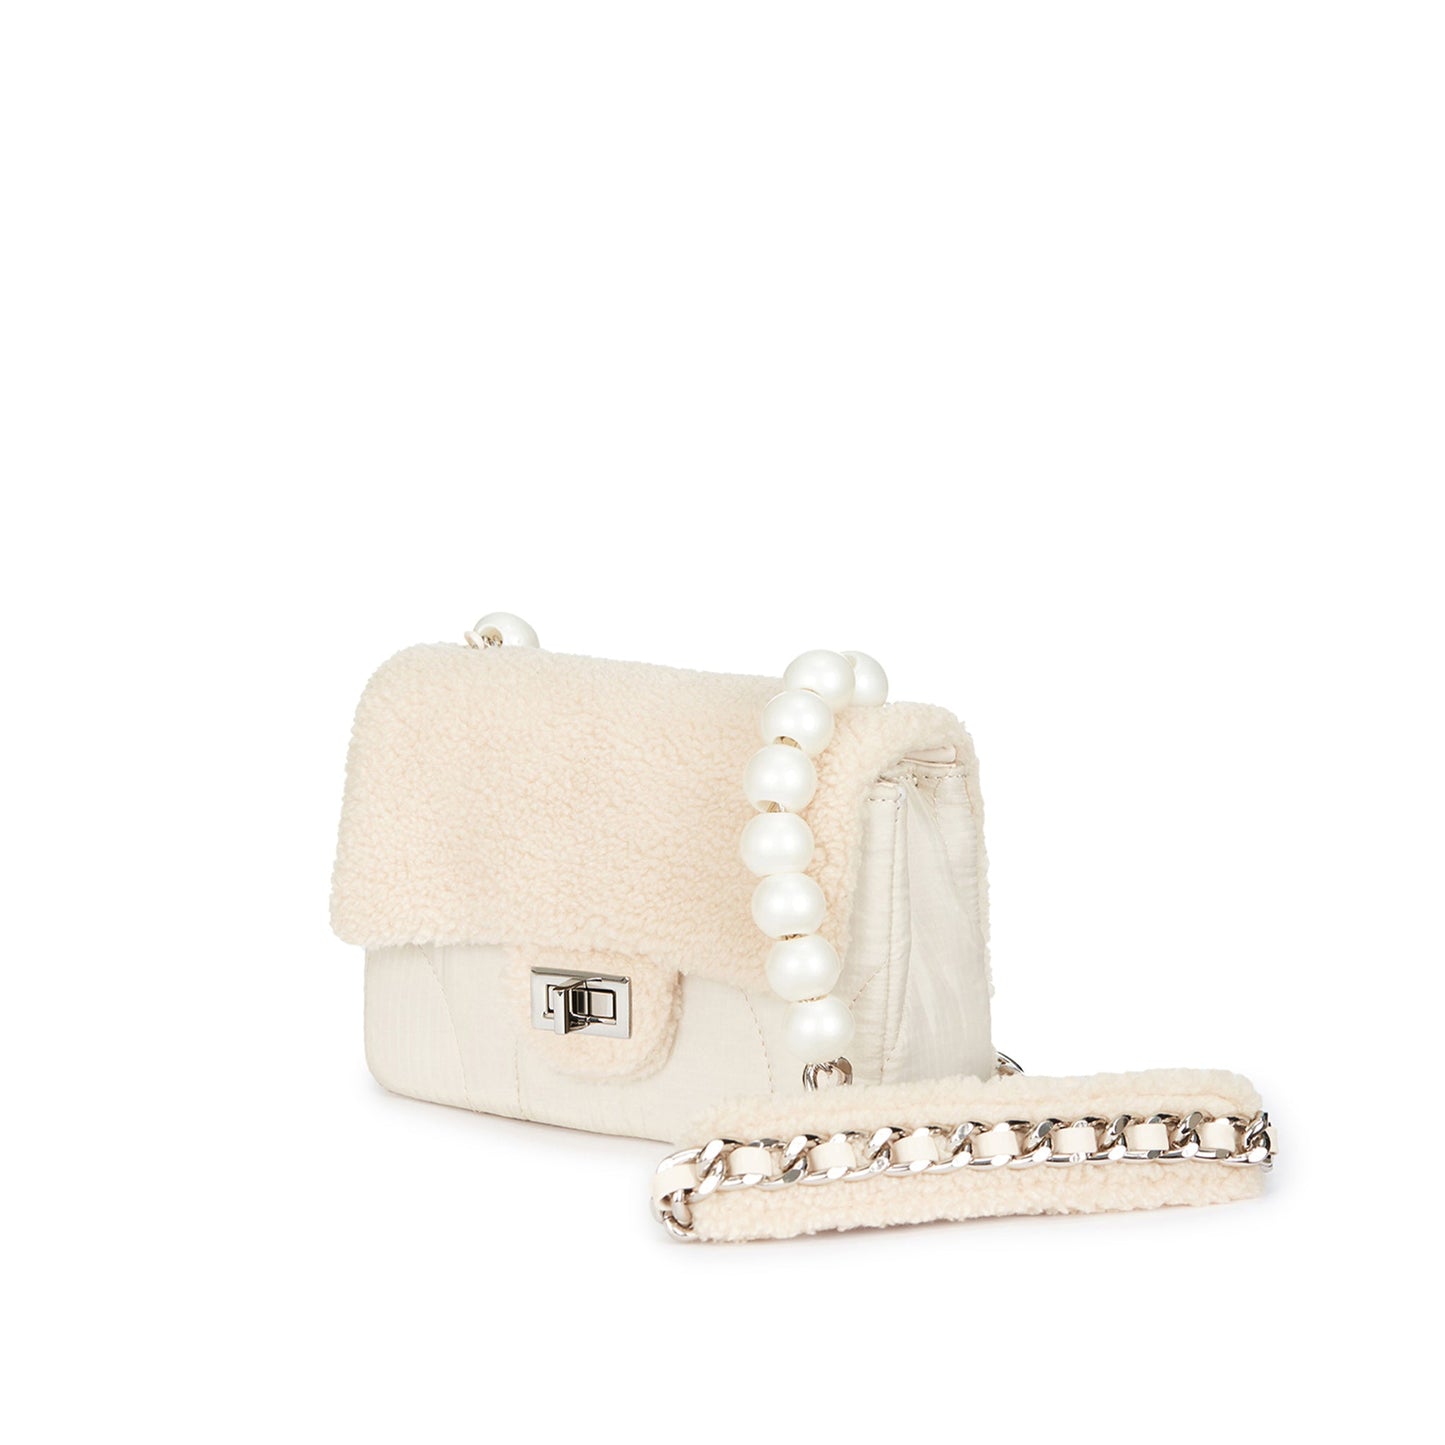 BEIGE Vintage Chain Bag SMALL